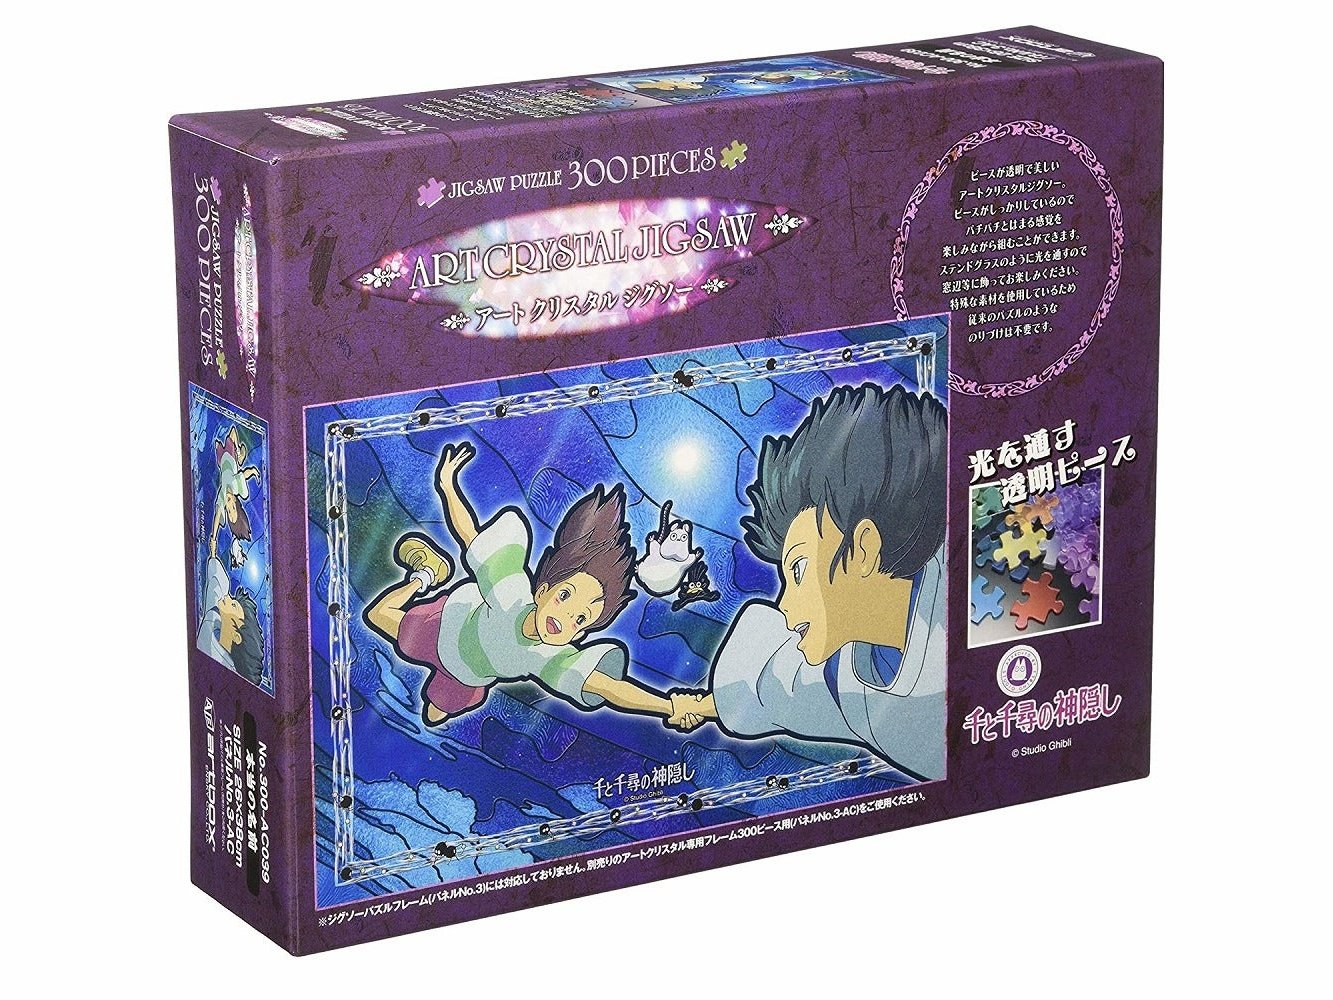 Ensky Frost Art Crystal Jigsaw Puzzle Spirited Away Real Name Jigsaw Puzzle 300 piece 26 x 38 cm